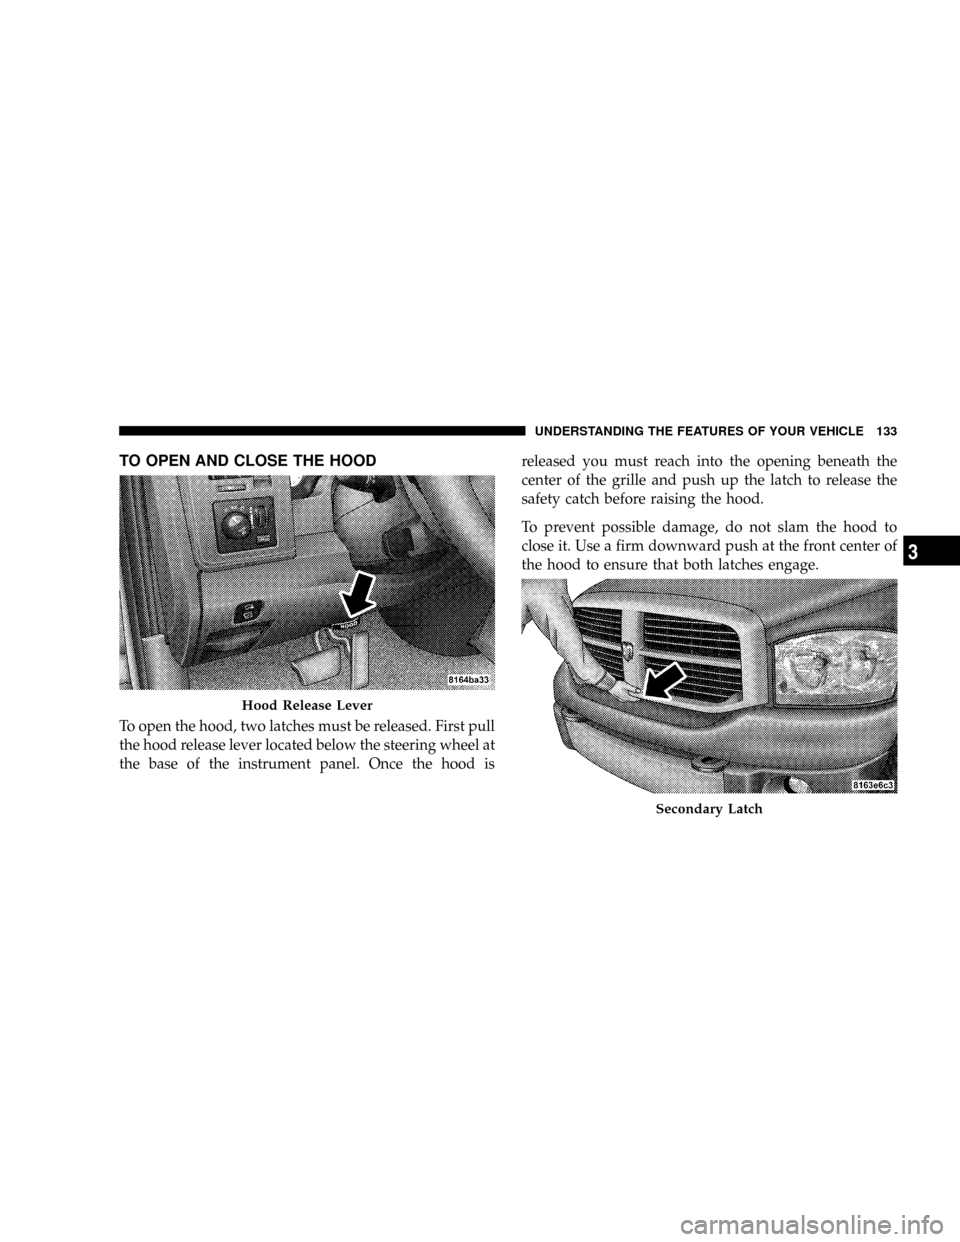 DODGE RAM 2500 GAS 2008 3.G Owners Manual TO OPEN AND CLOSE THE HOOD
To open the hood, two latches must be released. First pull
the hood release lever located below the steering wheel at
the base of the instrument panel. Once the hood isrelea